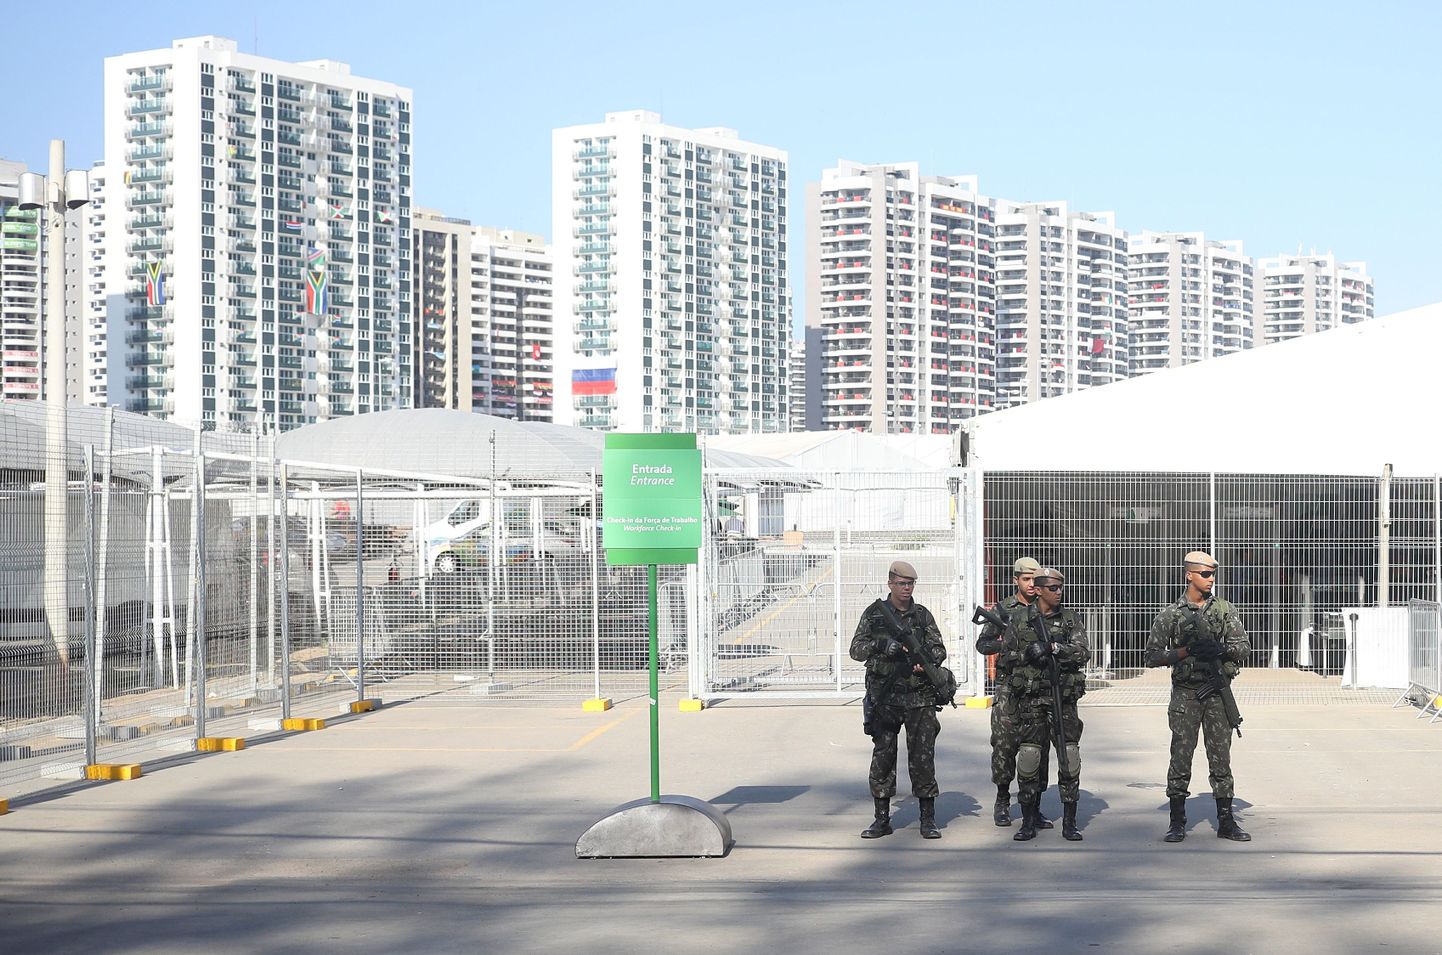 Rio Olympics - Olympic Village - Rio de Janeiro, Brazil - 05/08/2016. Soldiers stand outside workers entrance to athletes village.               REUTERS/Phil Noble  FOR EDITORIAL USE ONLY. NOT FOR SALE FOR MARKETING OR ADVERTISING CAMPAIGNS.